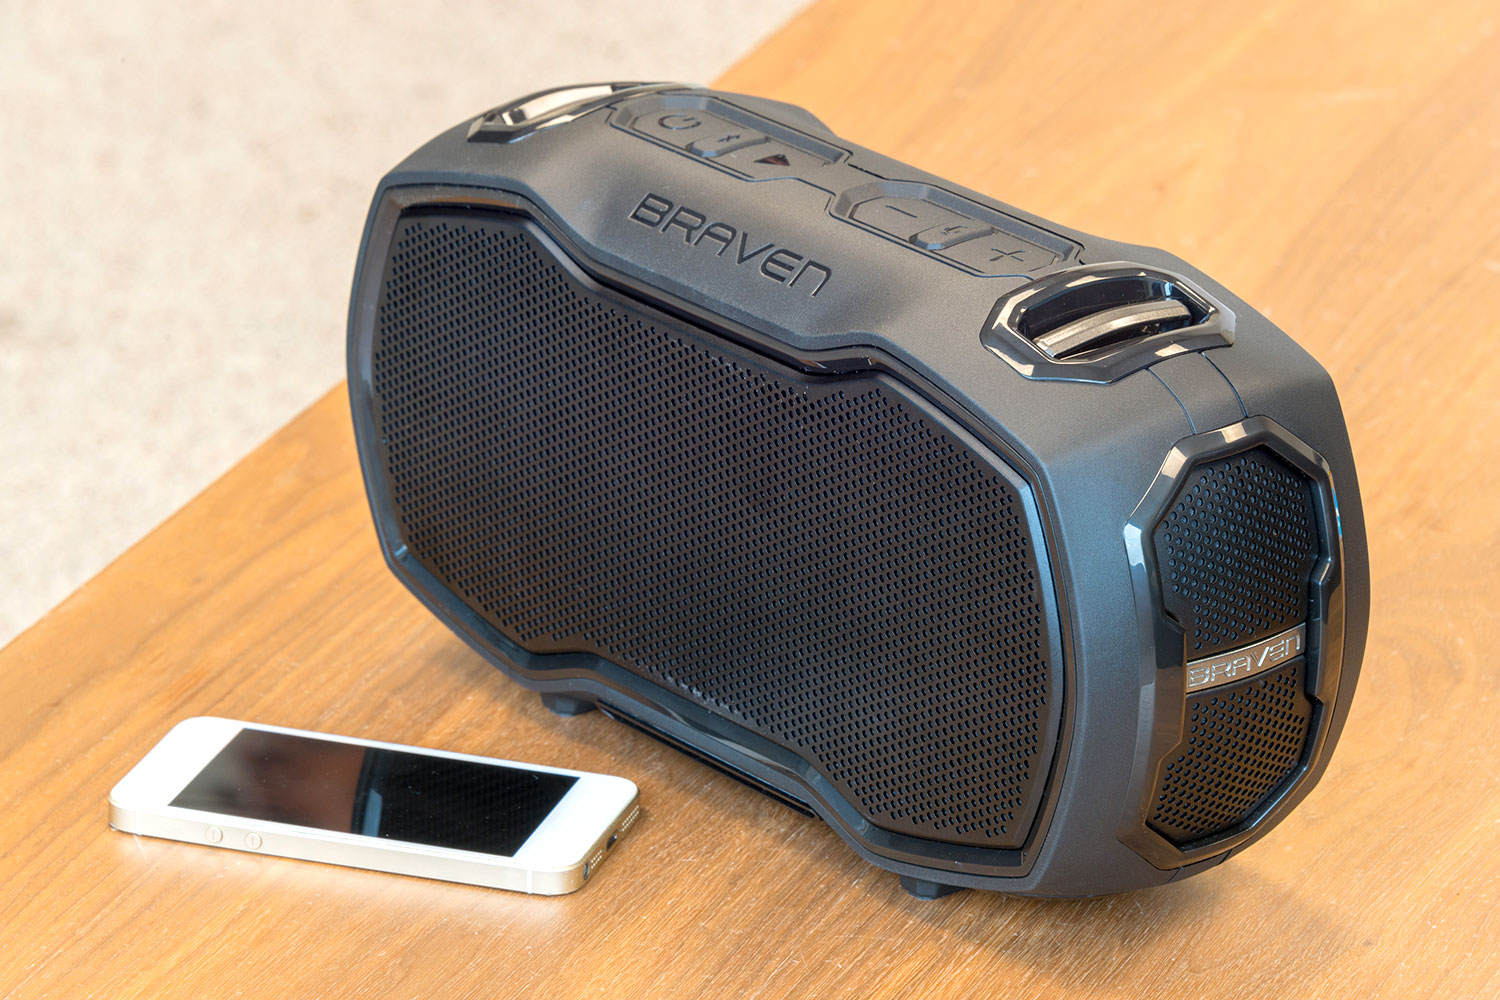 Braven Ready Solo Waterproof Bluetooth Speaker Review, Page 2 of 4